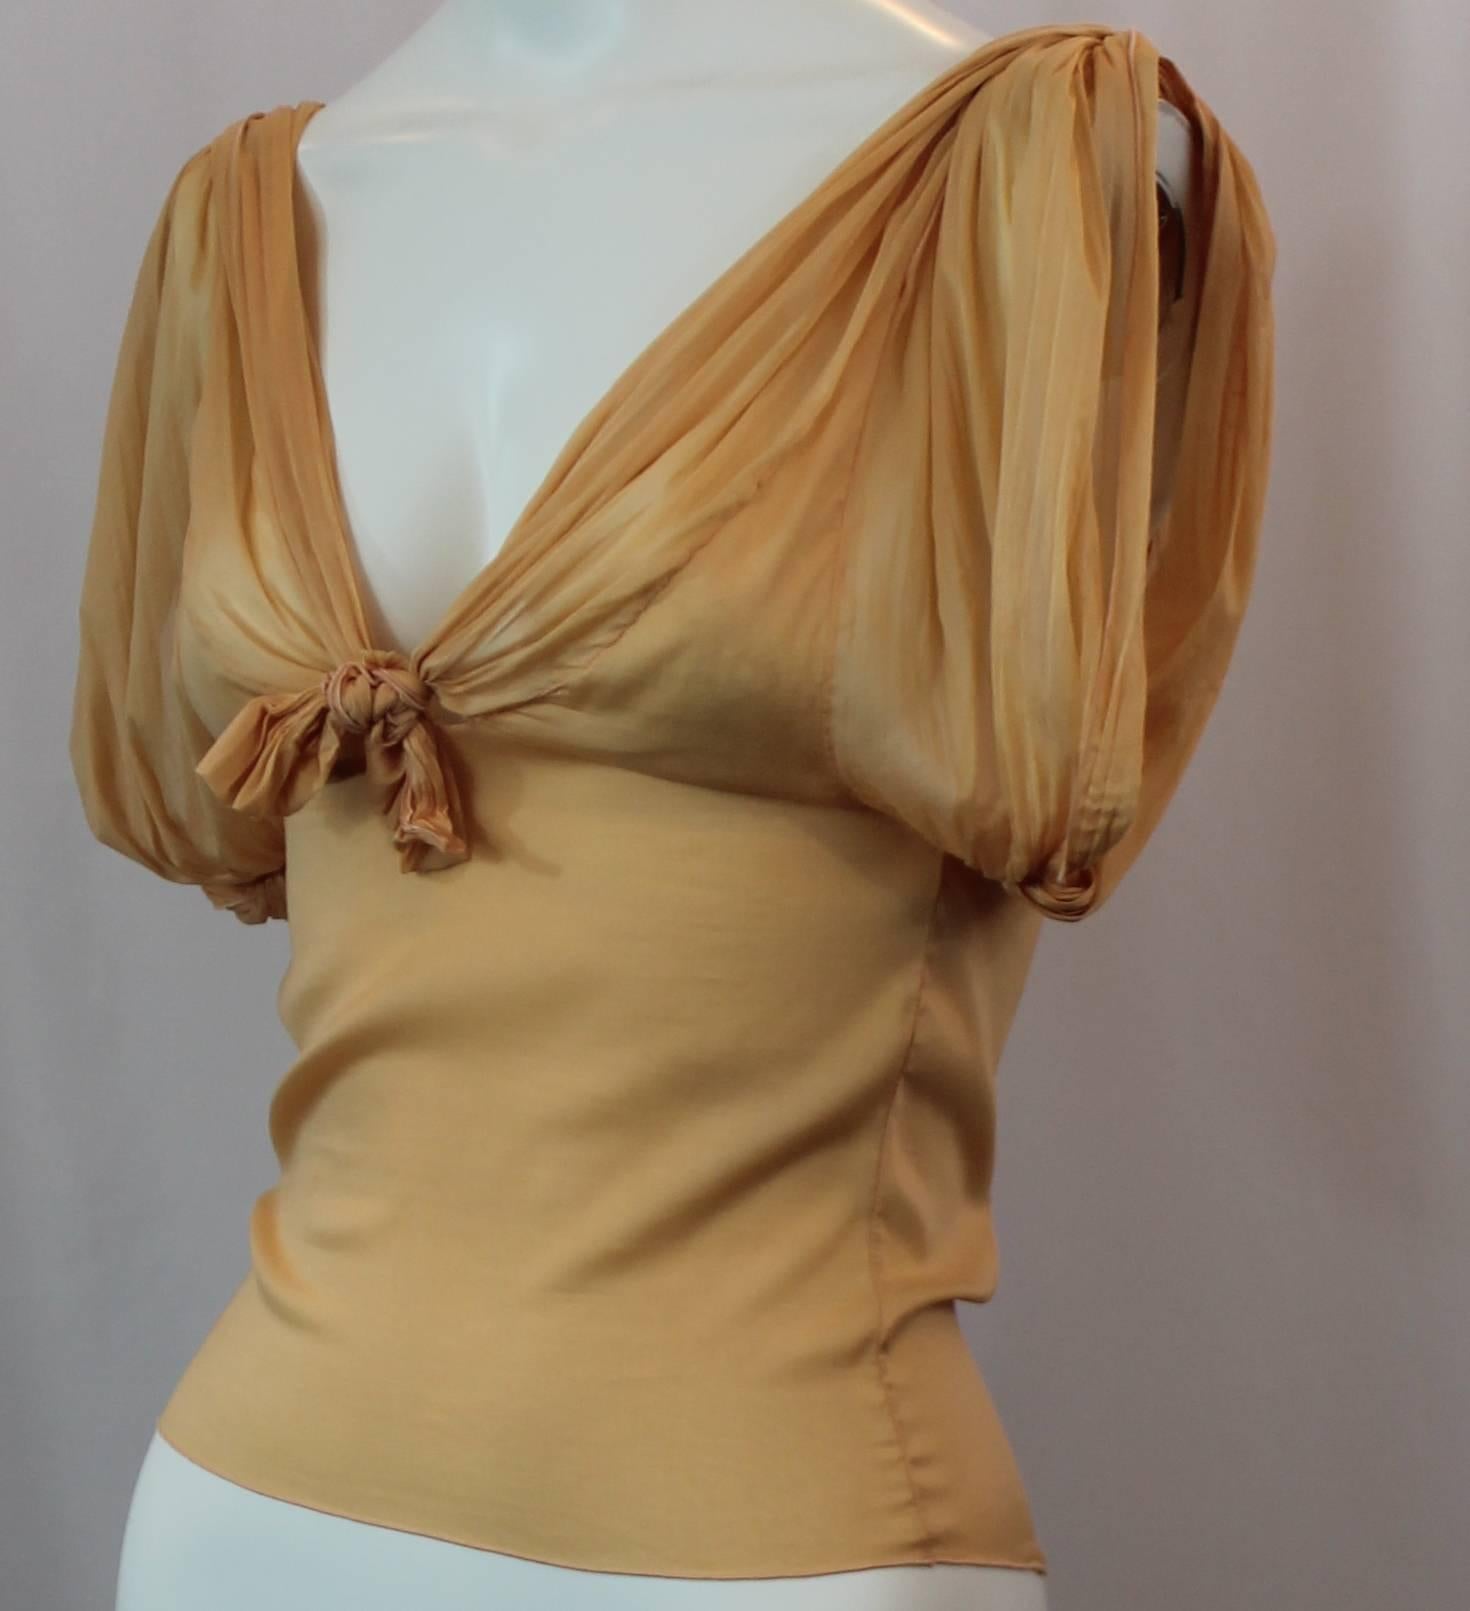 Christian Dior Mustard Colored Silk Ruched Sleeveless Blouse with Ties - S. This ruched sleeveless blouse has a front tie and a decorative back tie/ decoration. There is a plunging neckline and the blouse is made of a stretchy silk material. It is